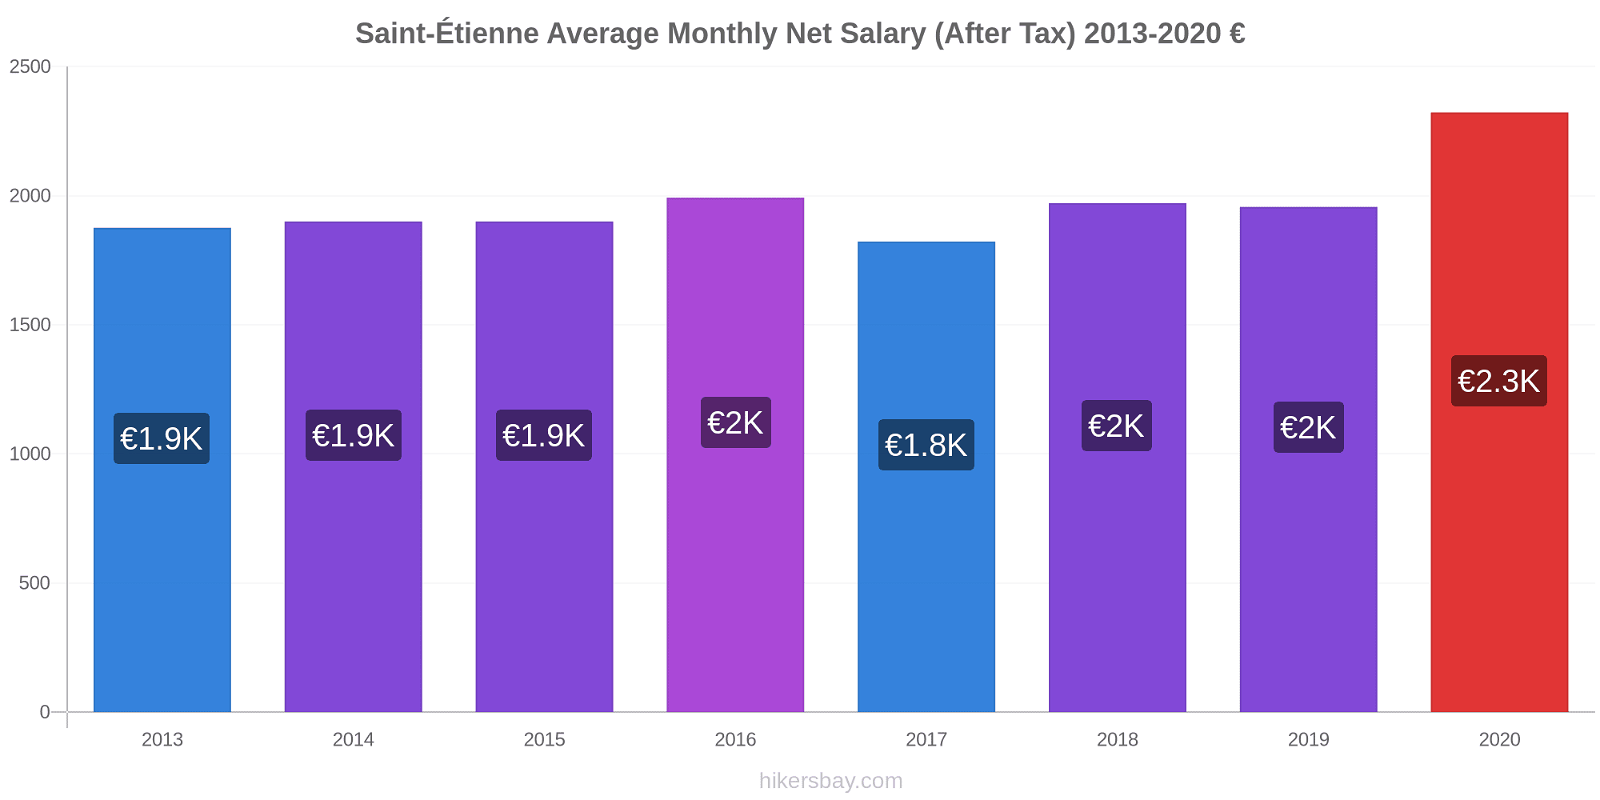 Saint-Étienne price changes Average Monthly Net Salary (After Tax) hikersbay.com